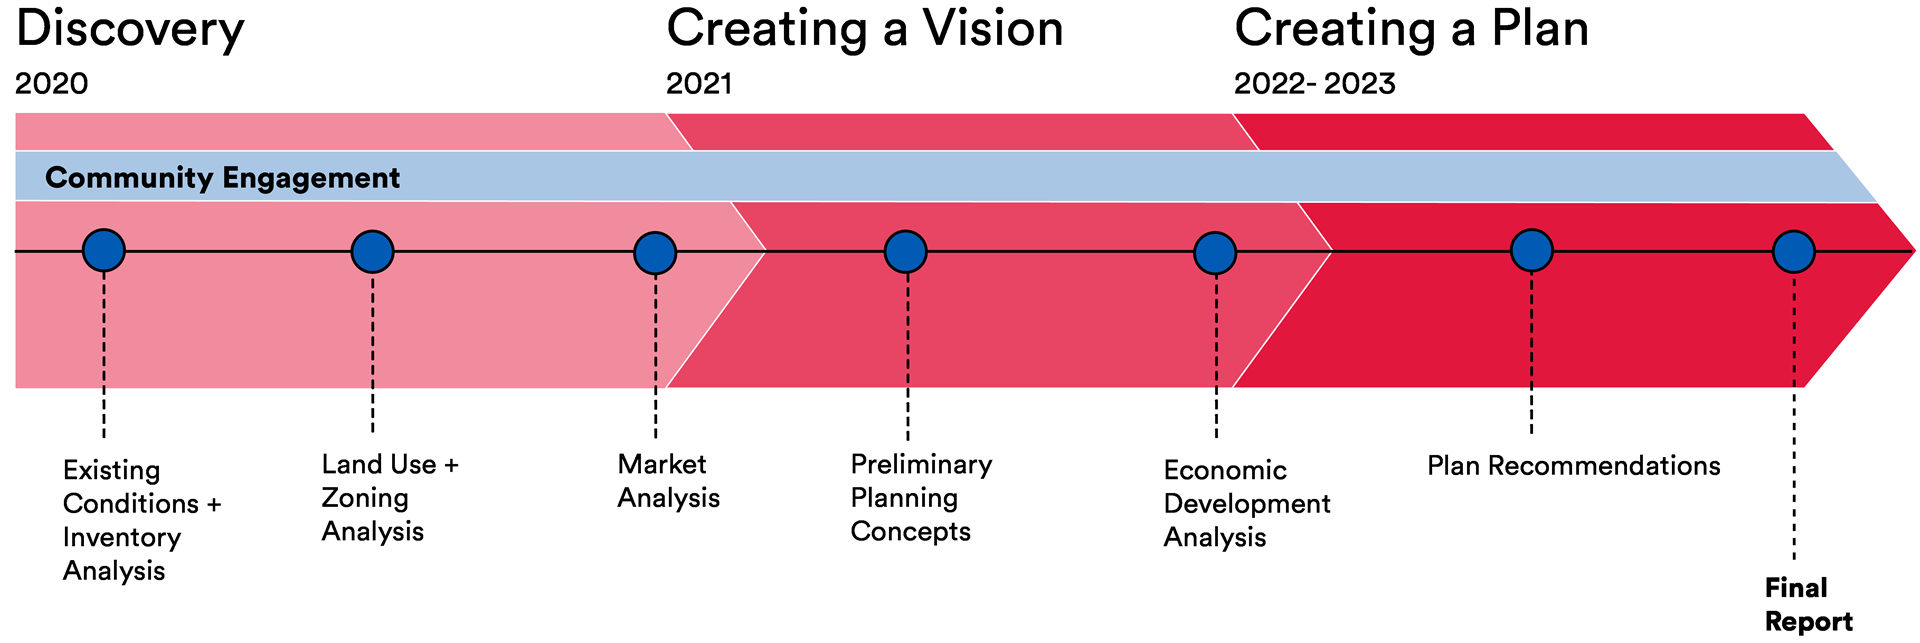 A graphic showing the RLE TSD Timeline. Discovery (2020): Existing Conditions + Inventory Analysis; Land Use + Zoning Analysis; Market Analysis. Creating a Vision (2021): Preliminary Planning Concepts; Economic Development Analysis. Creating a Plan (2022-2023): Plan Recommendations; Final Report.